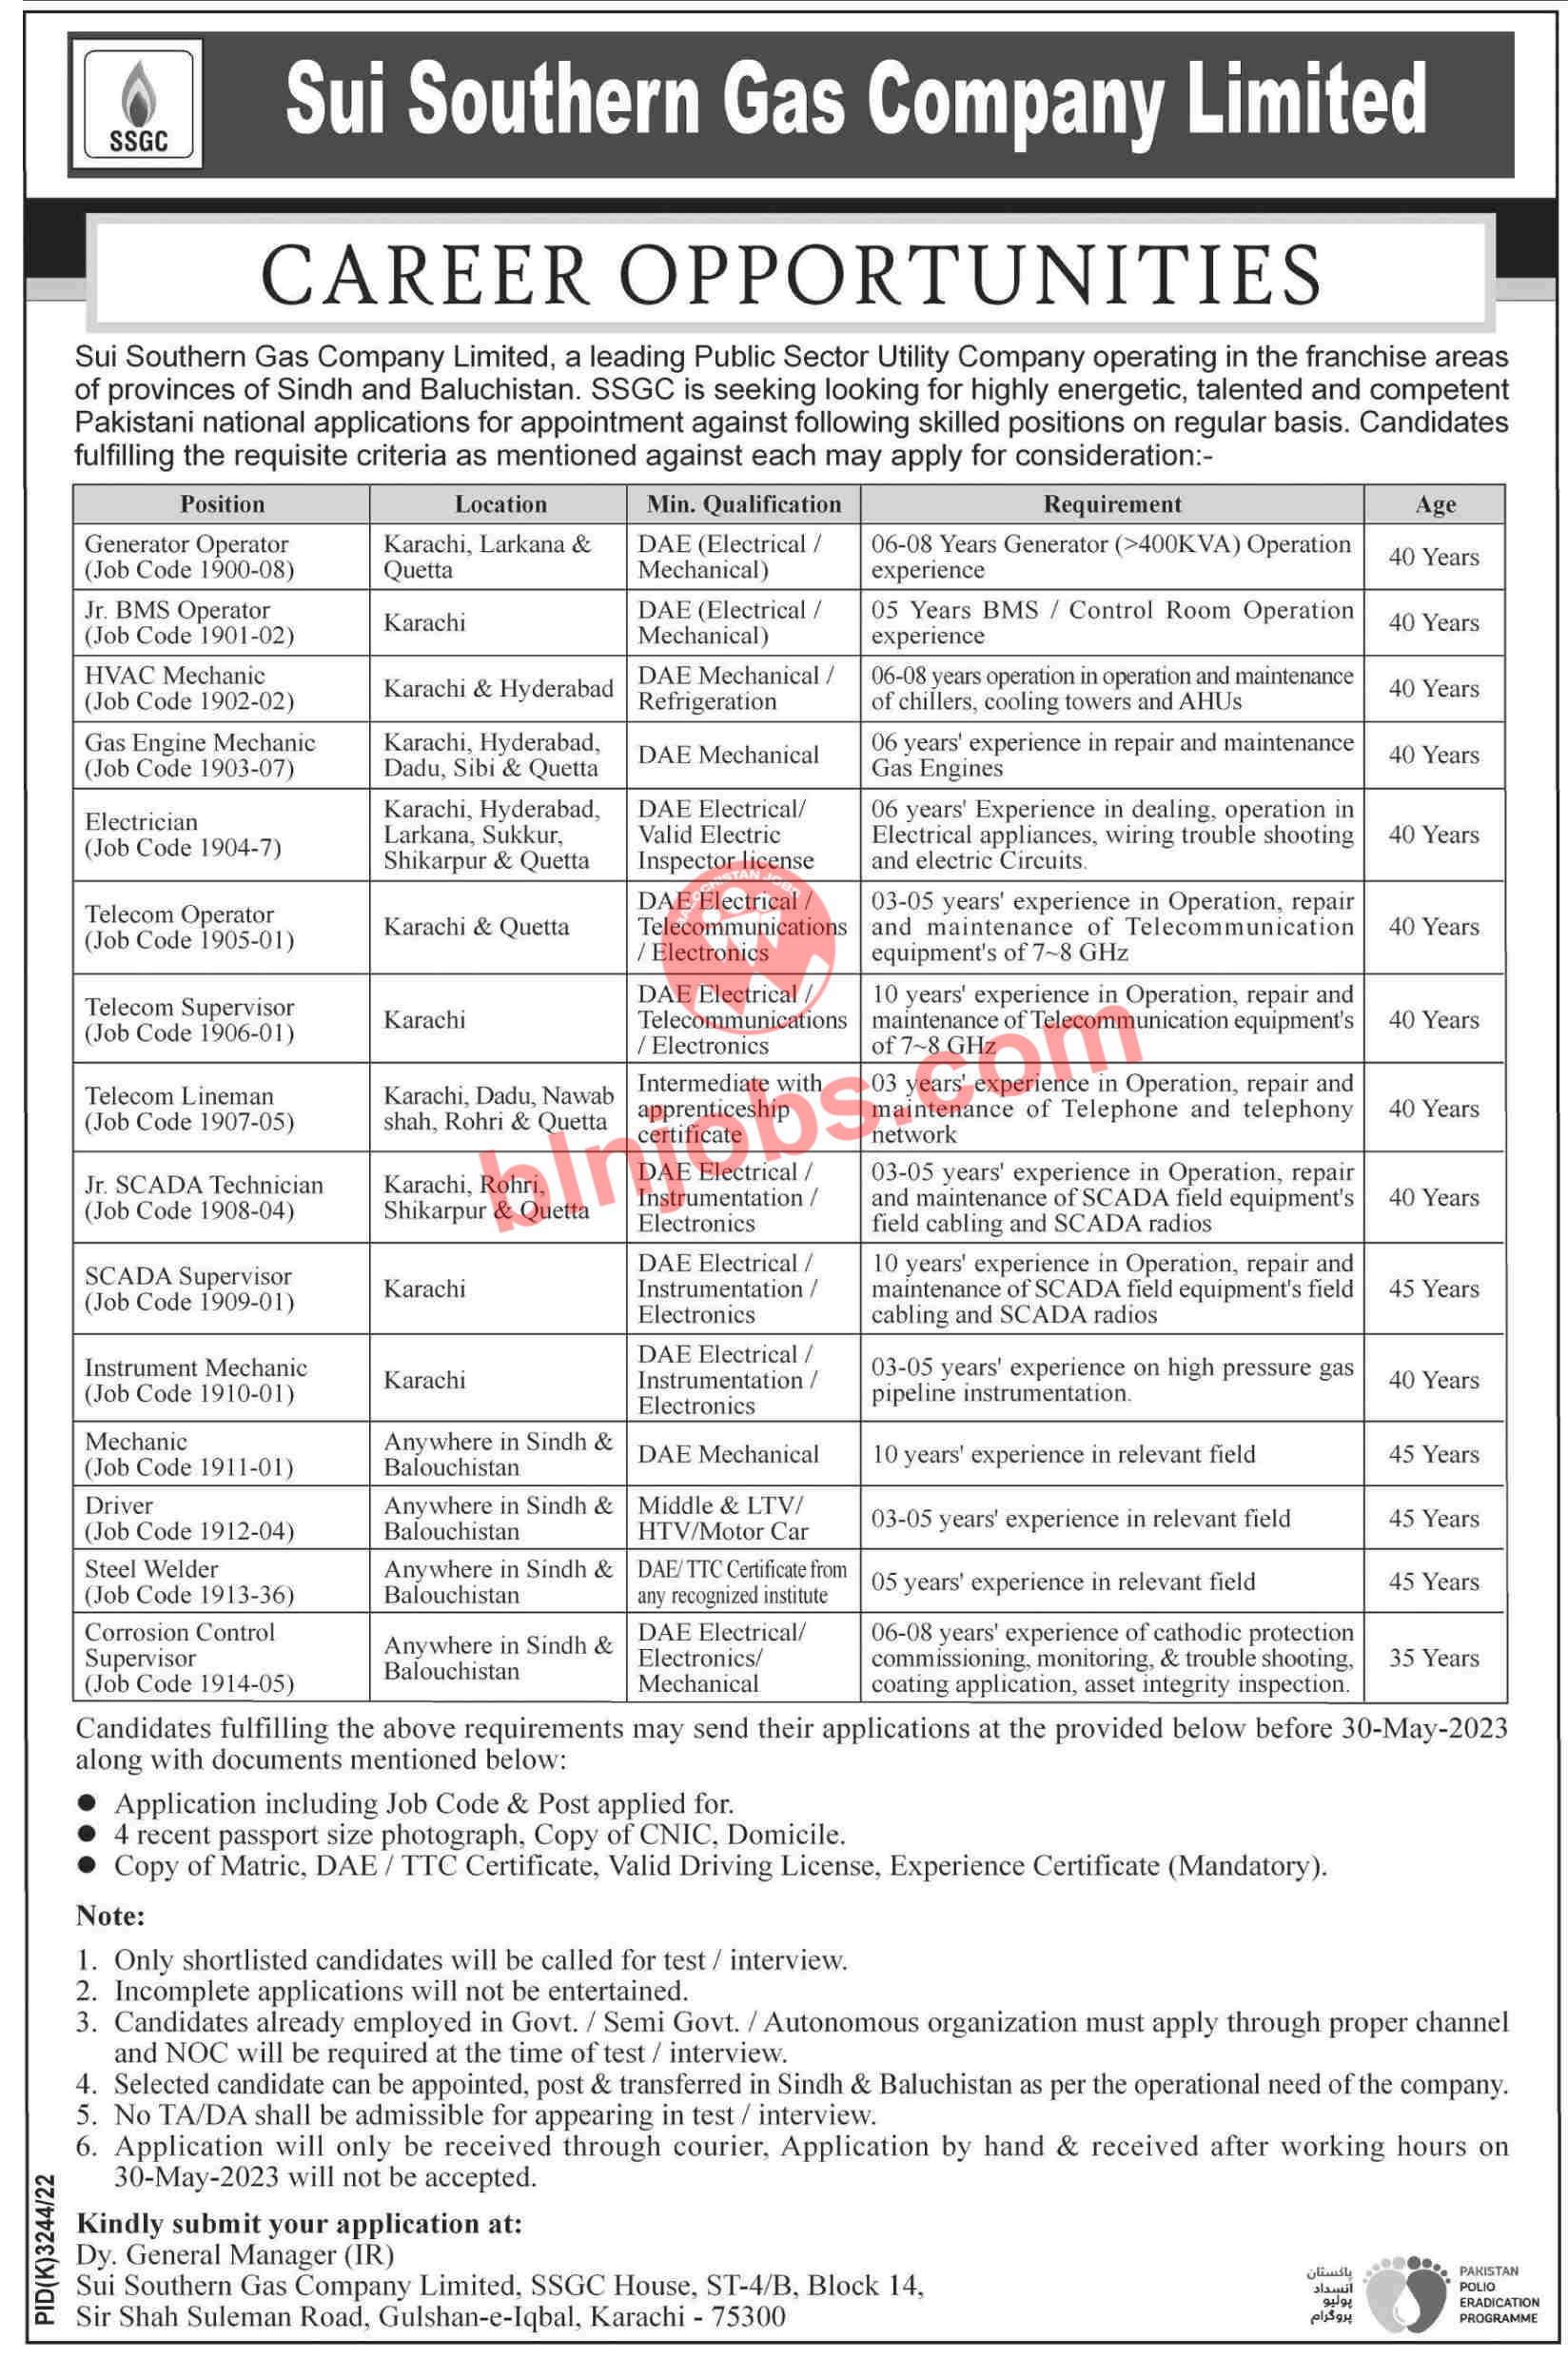 Sui Southern Gas Company SSGC Jobs 2023